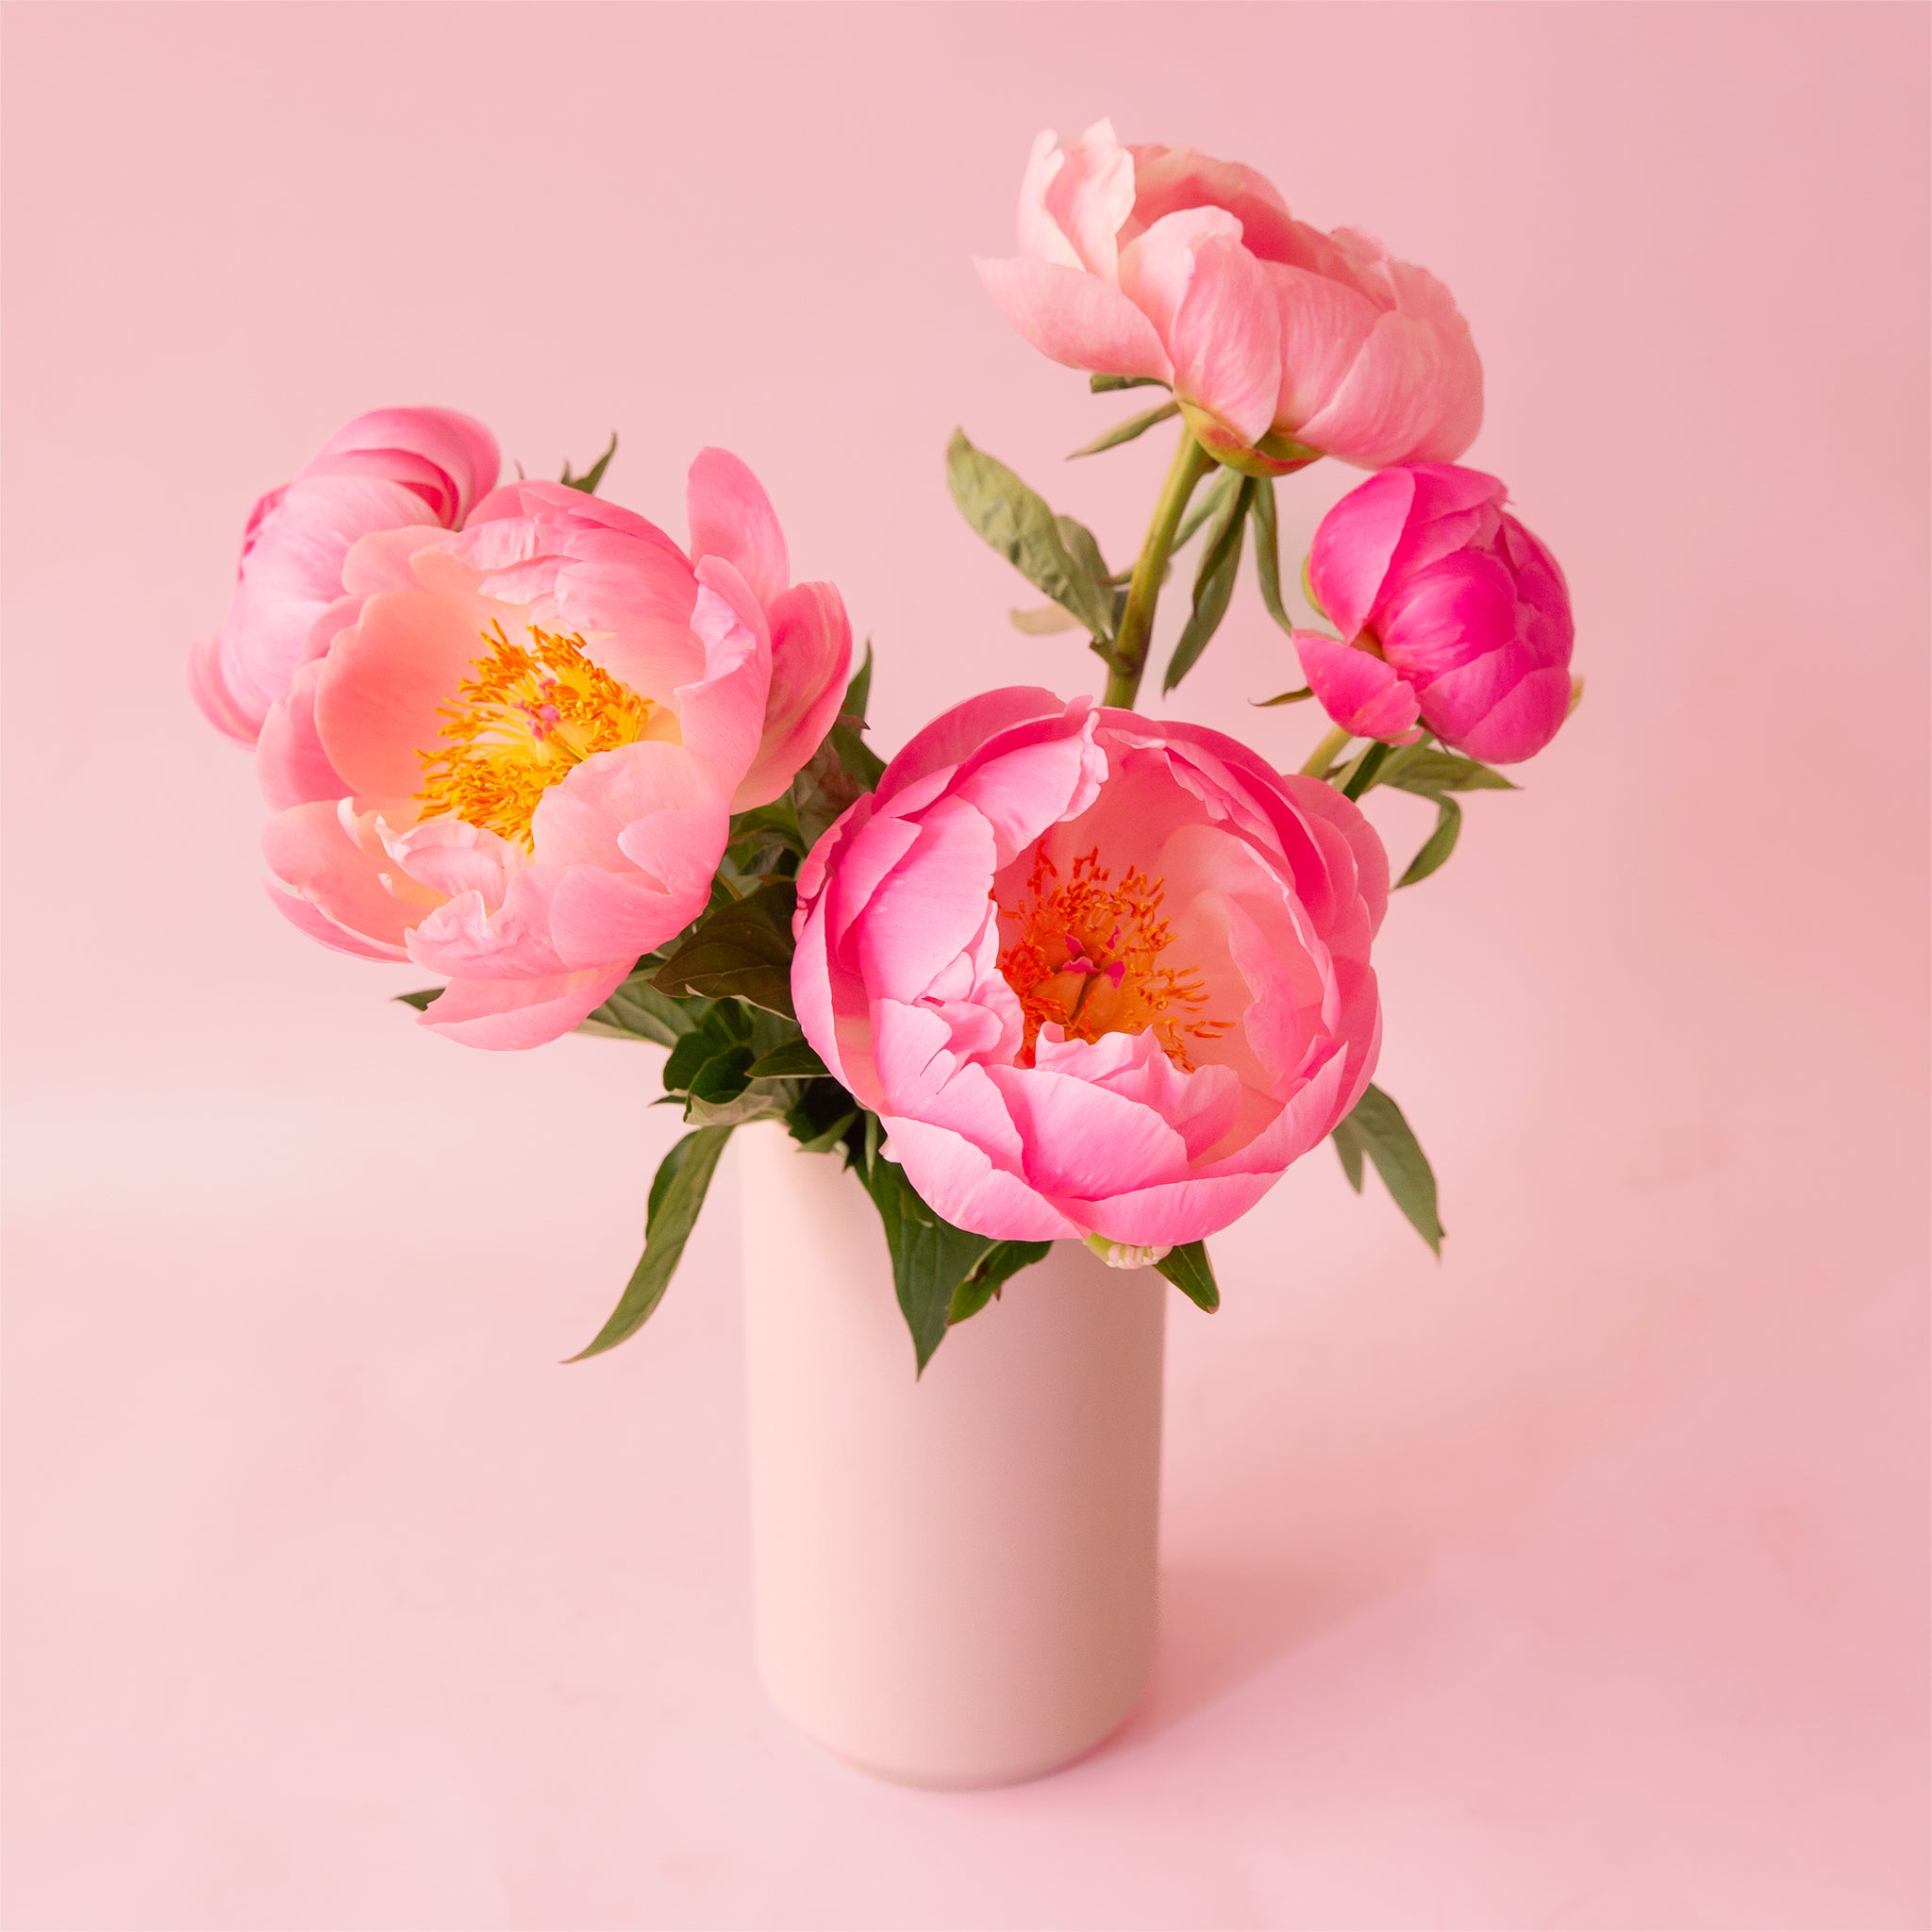 A tall, matte pink cylindrical vase with a dried floral arrangement inside.